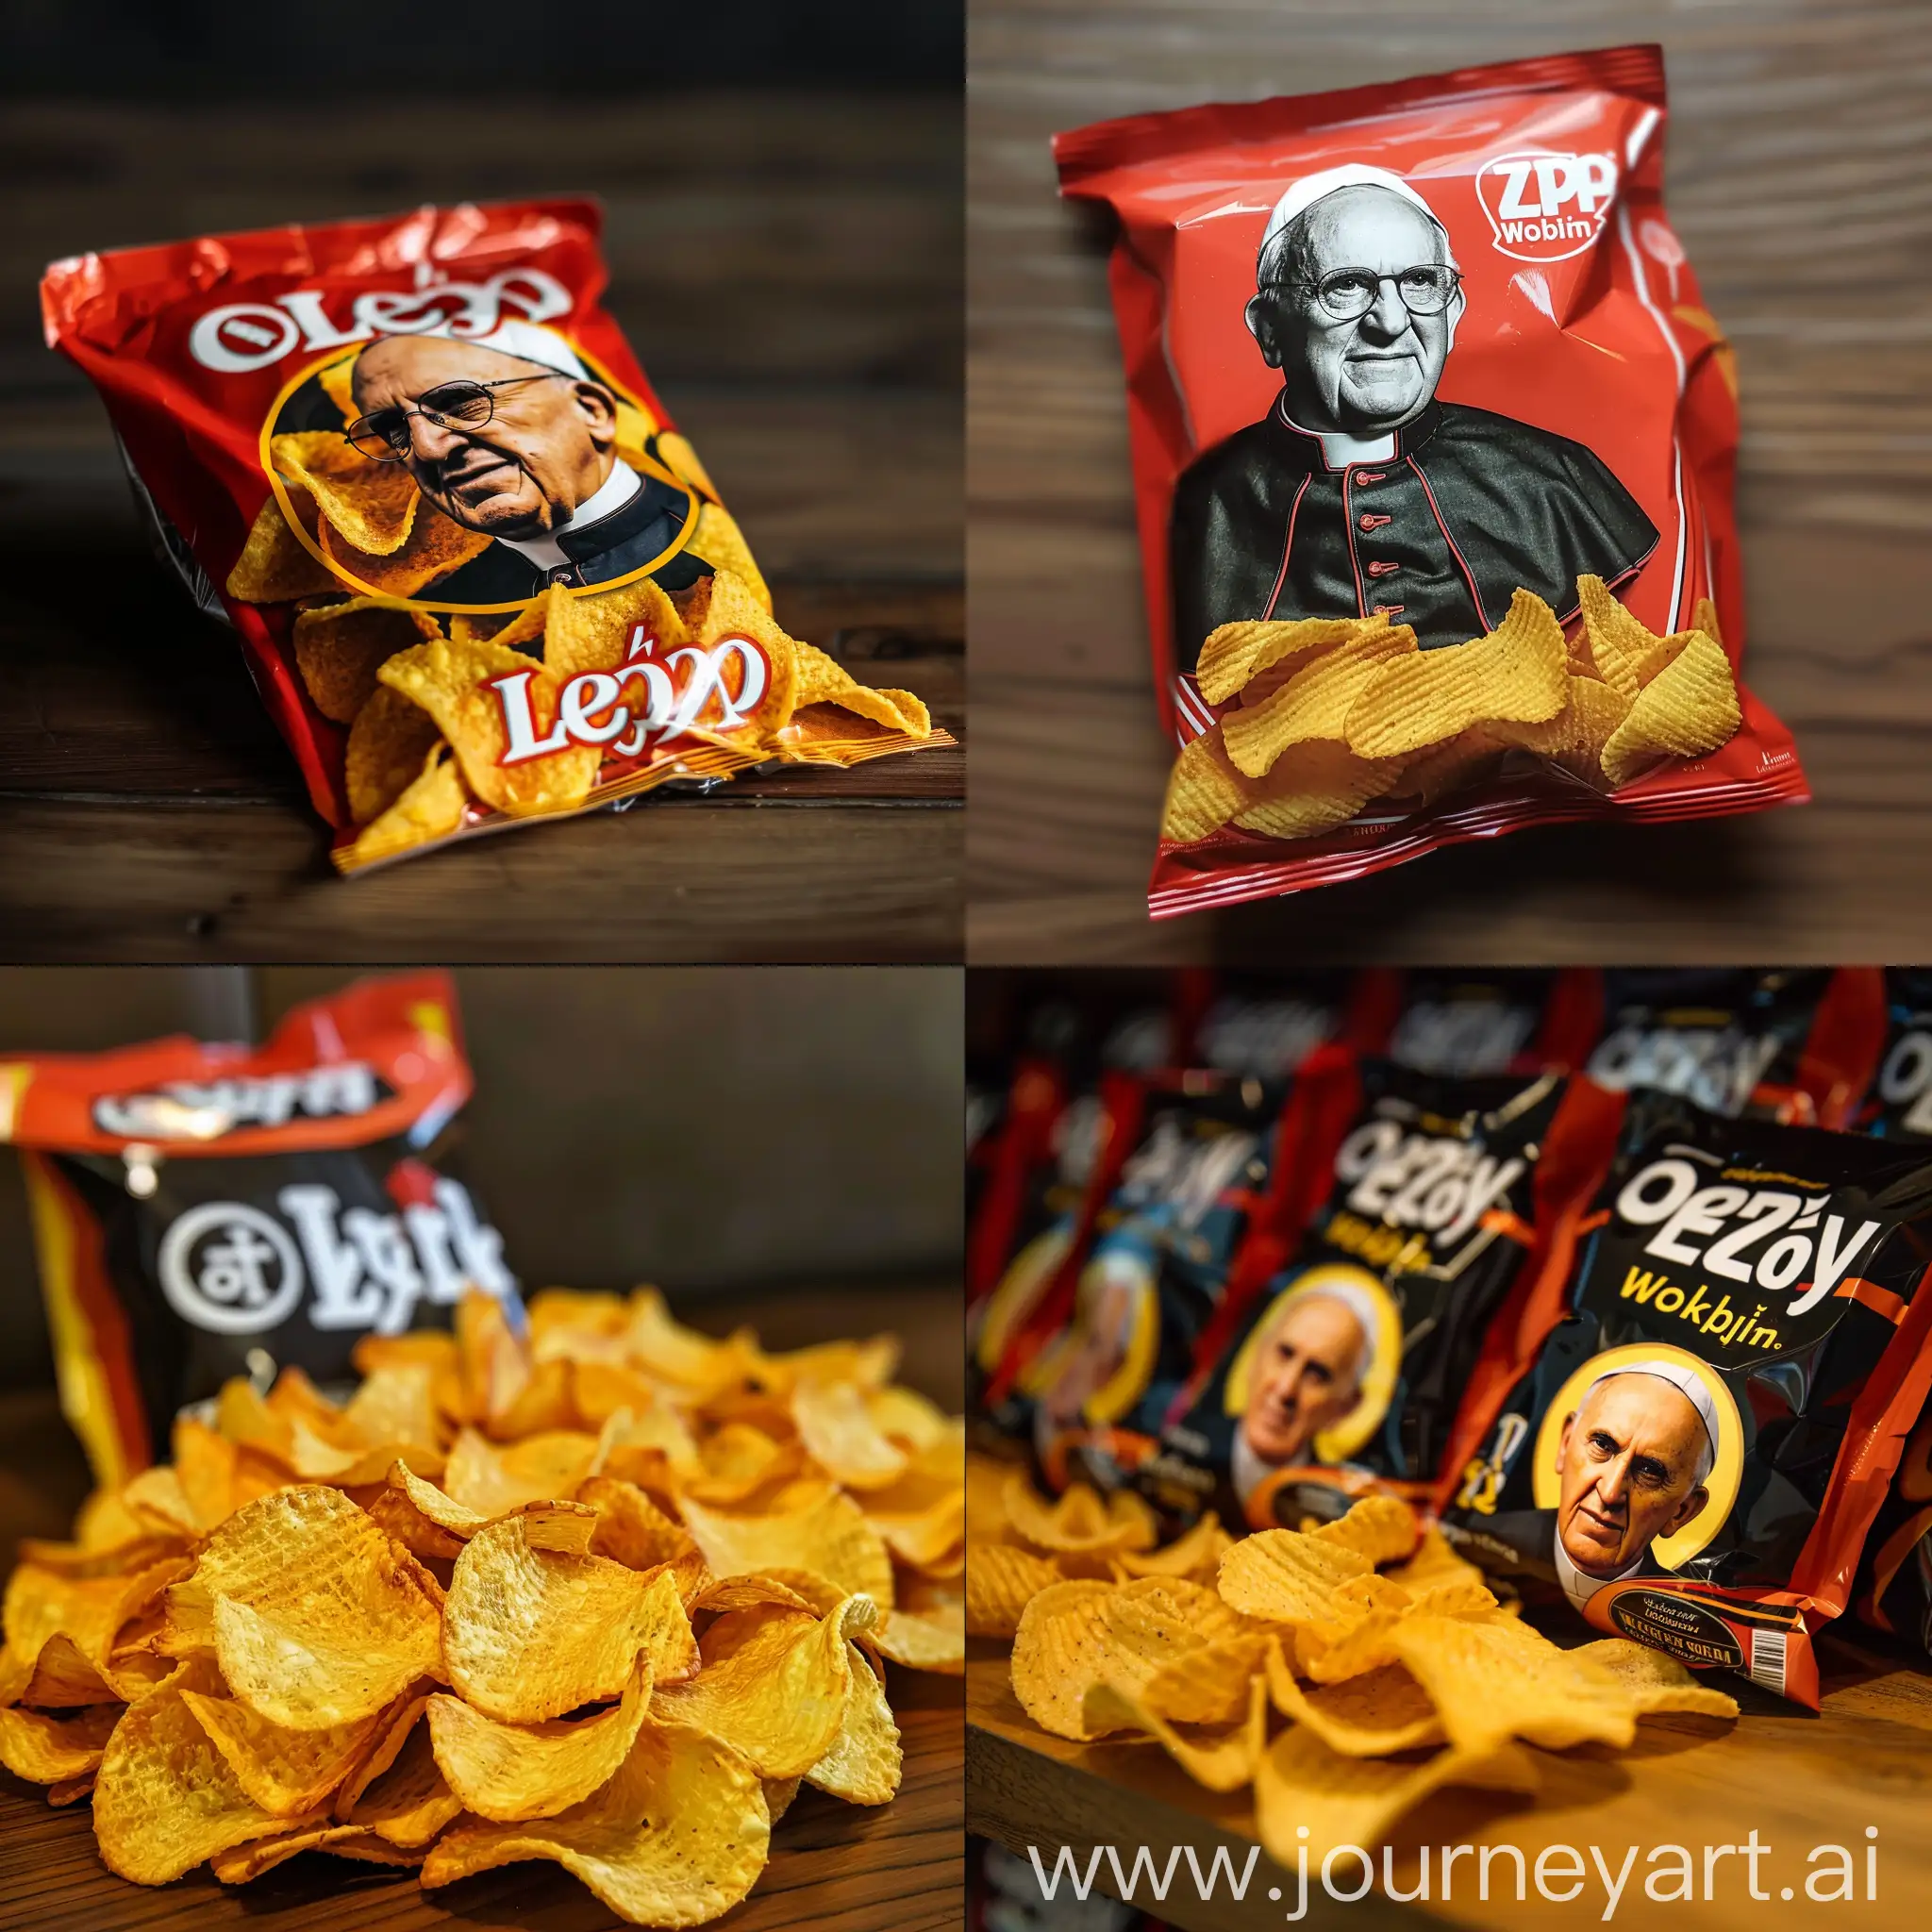 Pack-of-Lays-Chips-Flavored-with-Karol-Wojtya